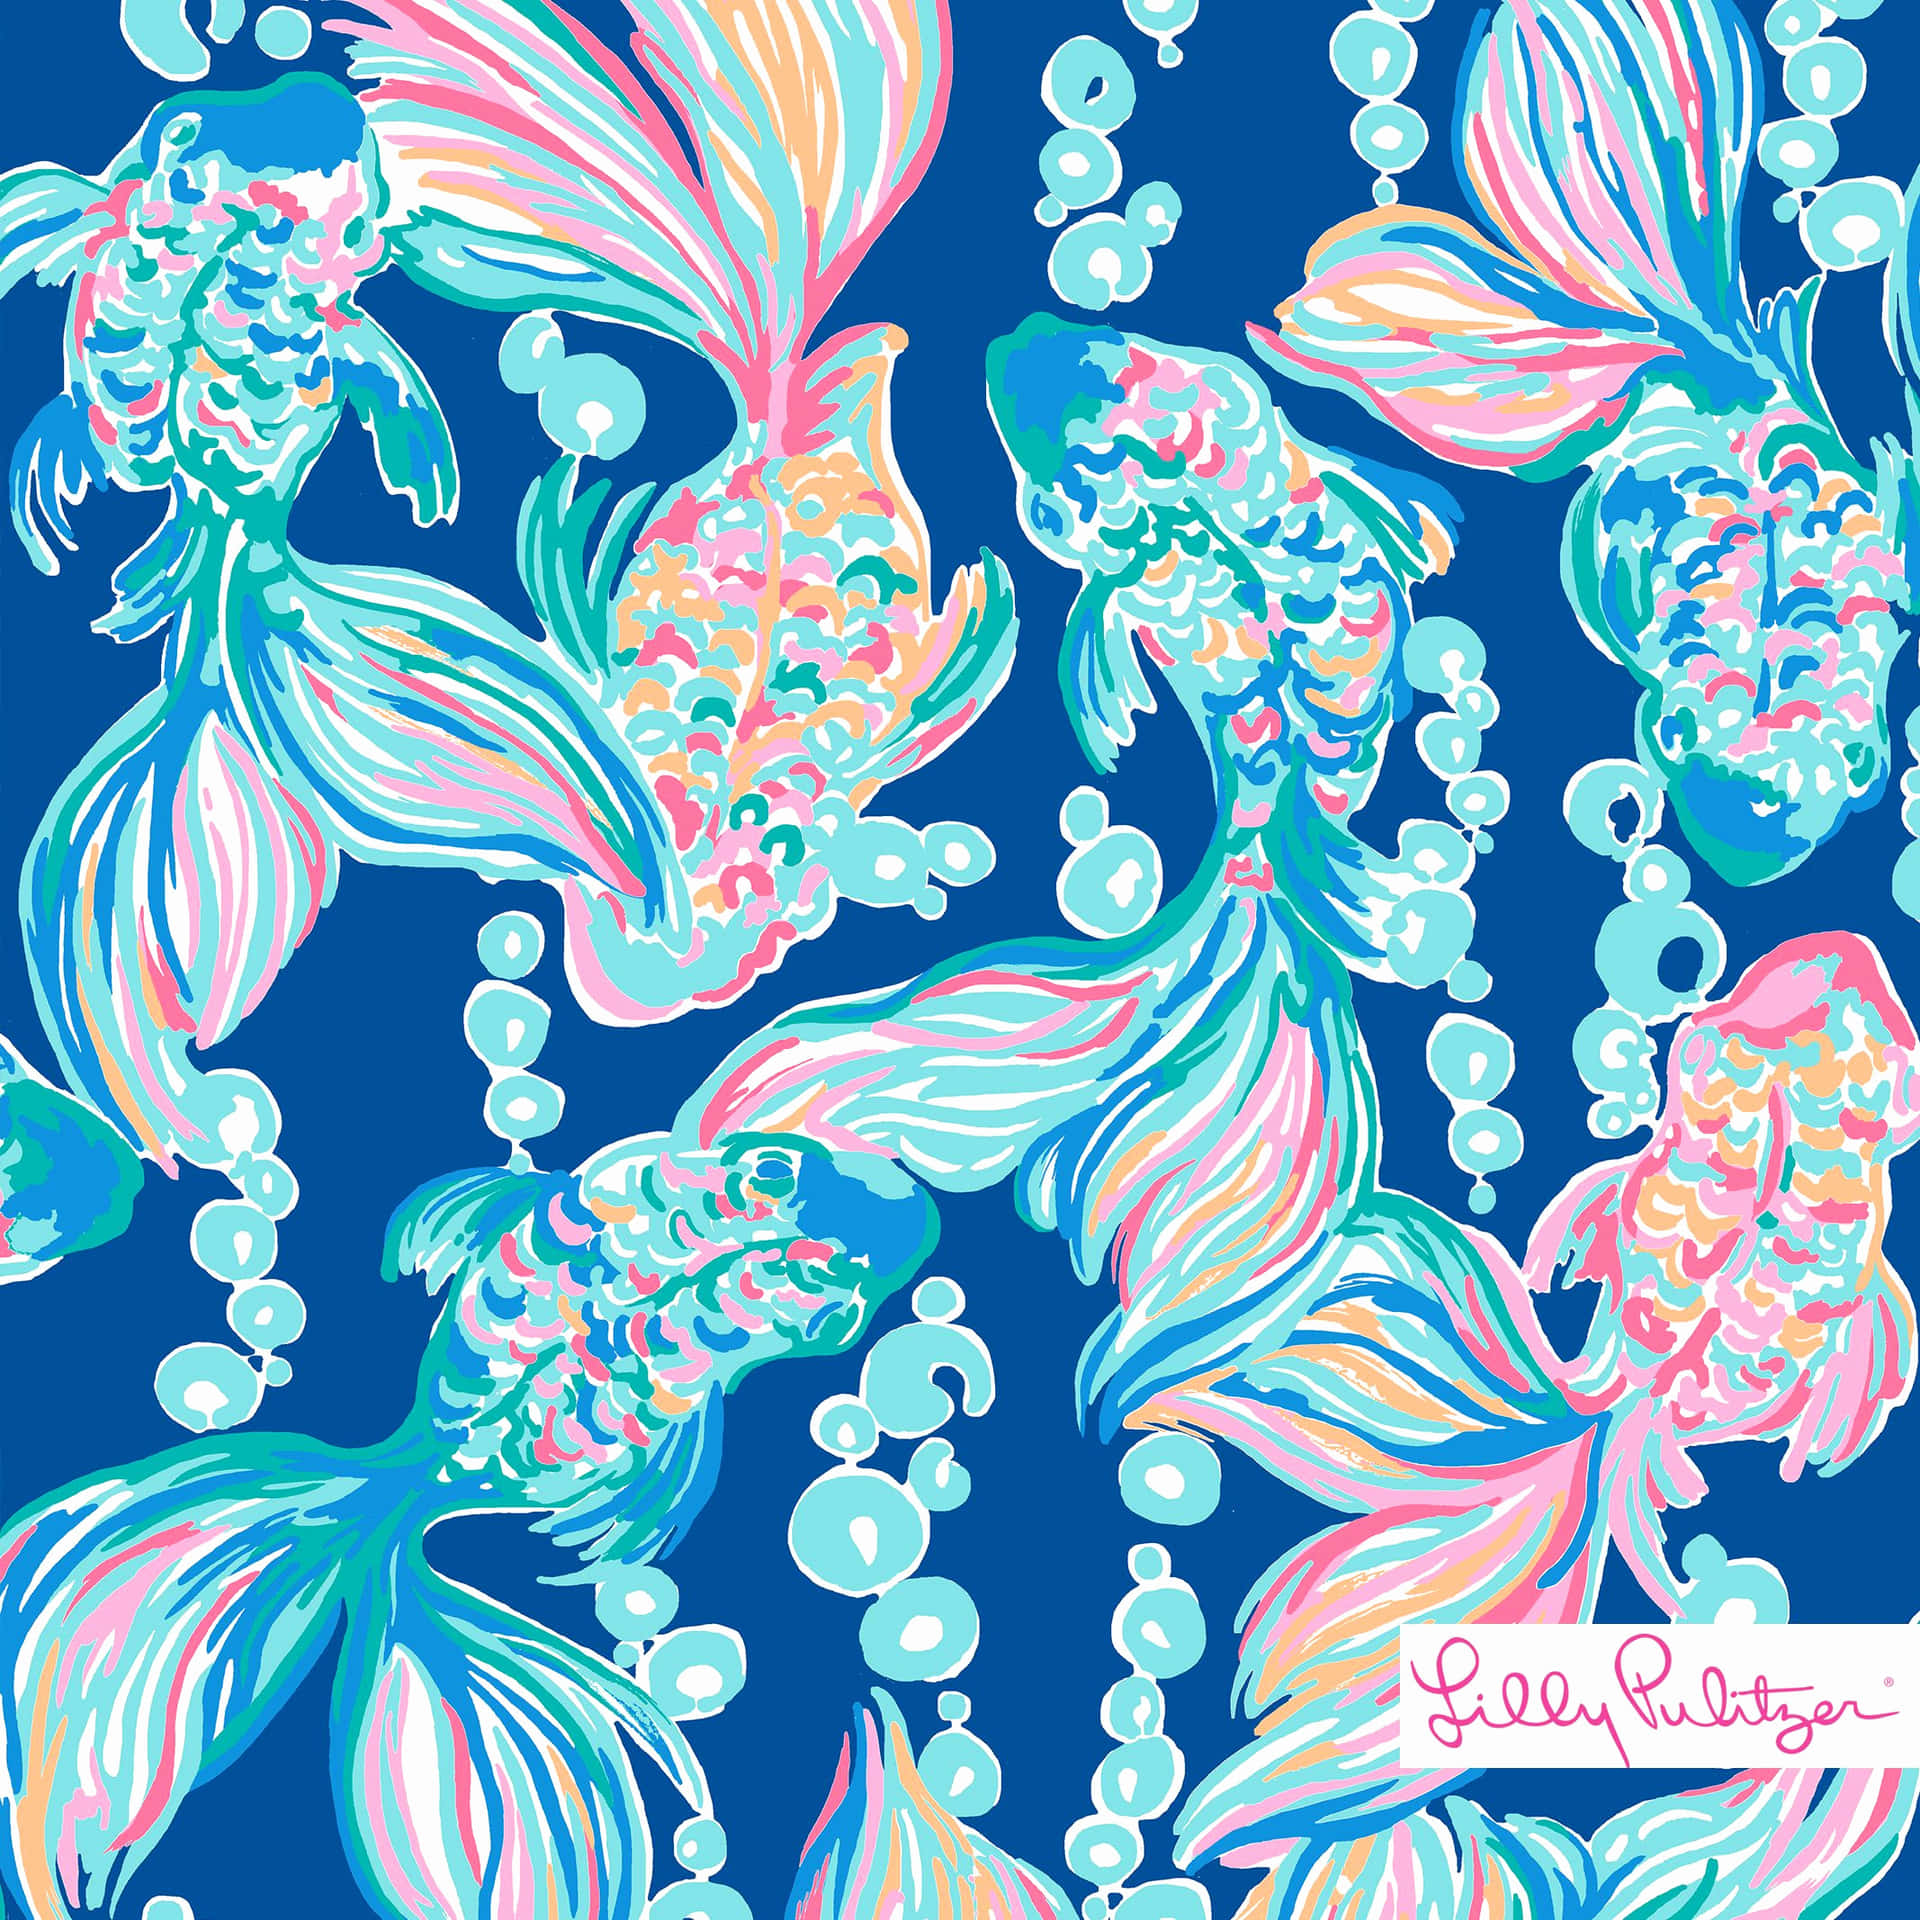 Live life with a splash of color in stylish Lilly Pulitzer designs